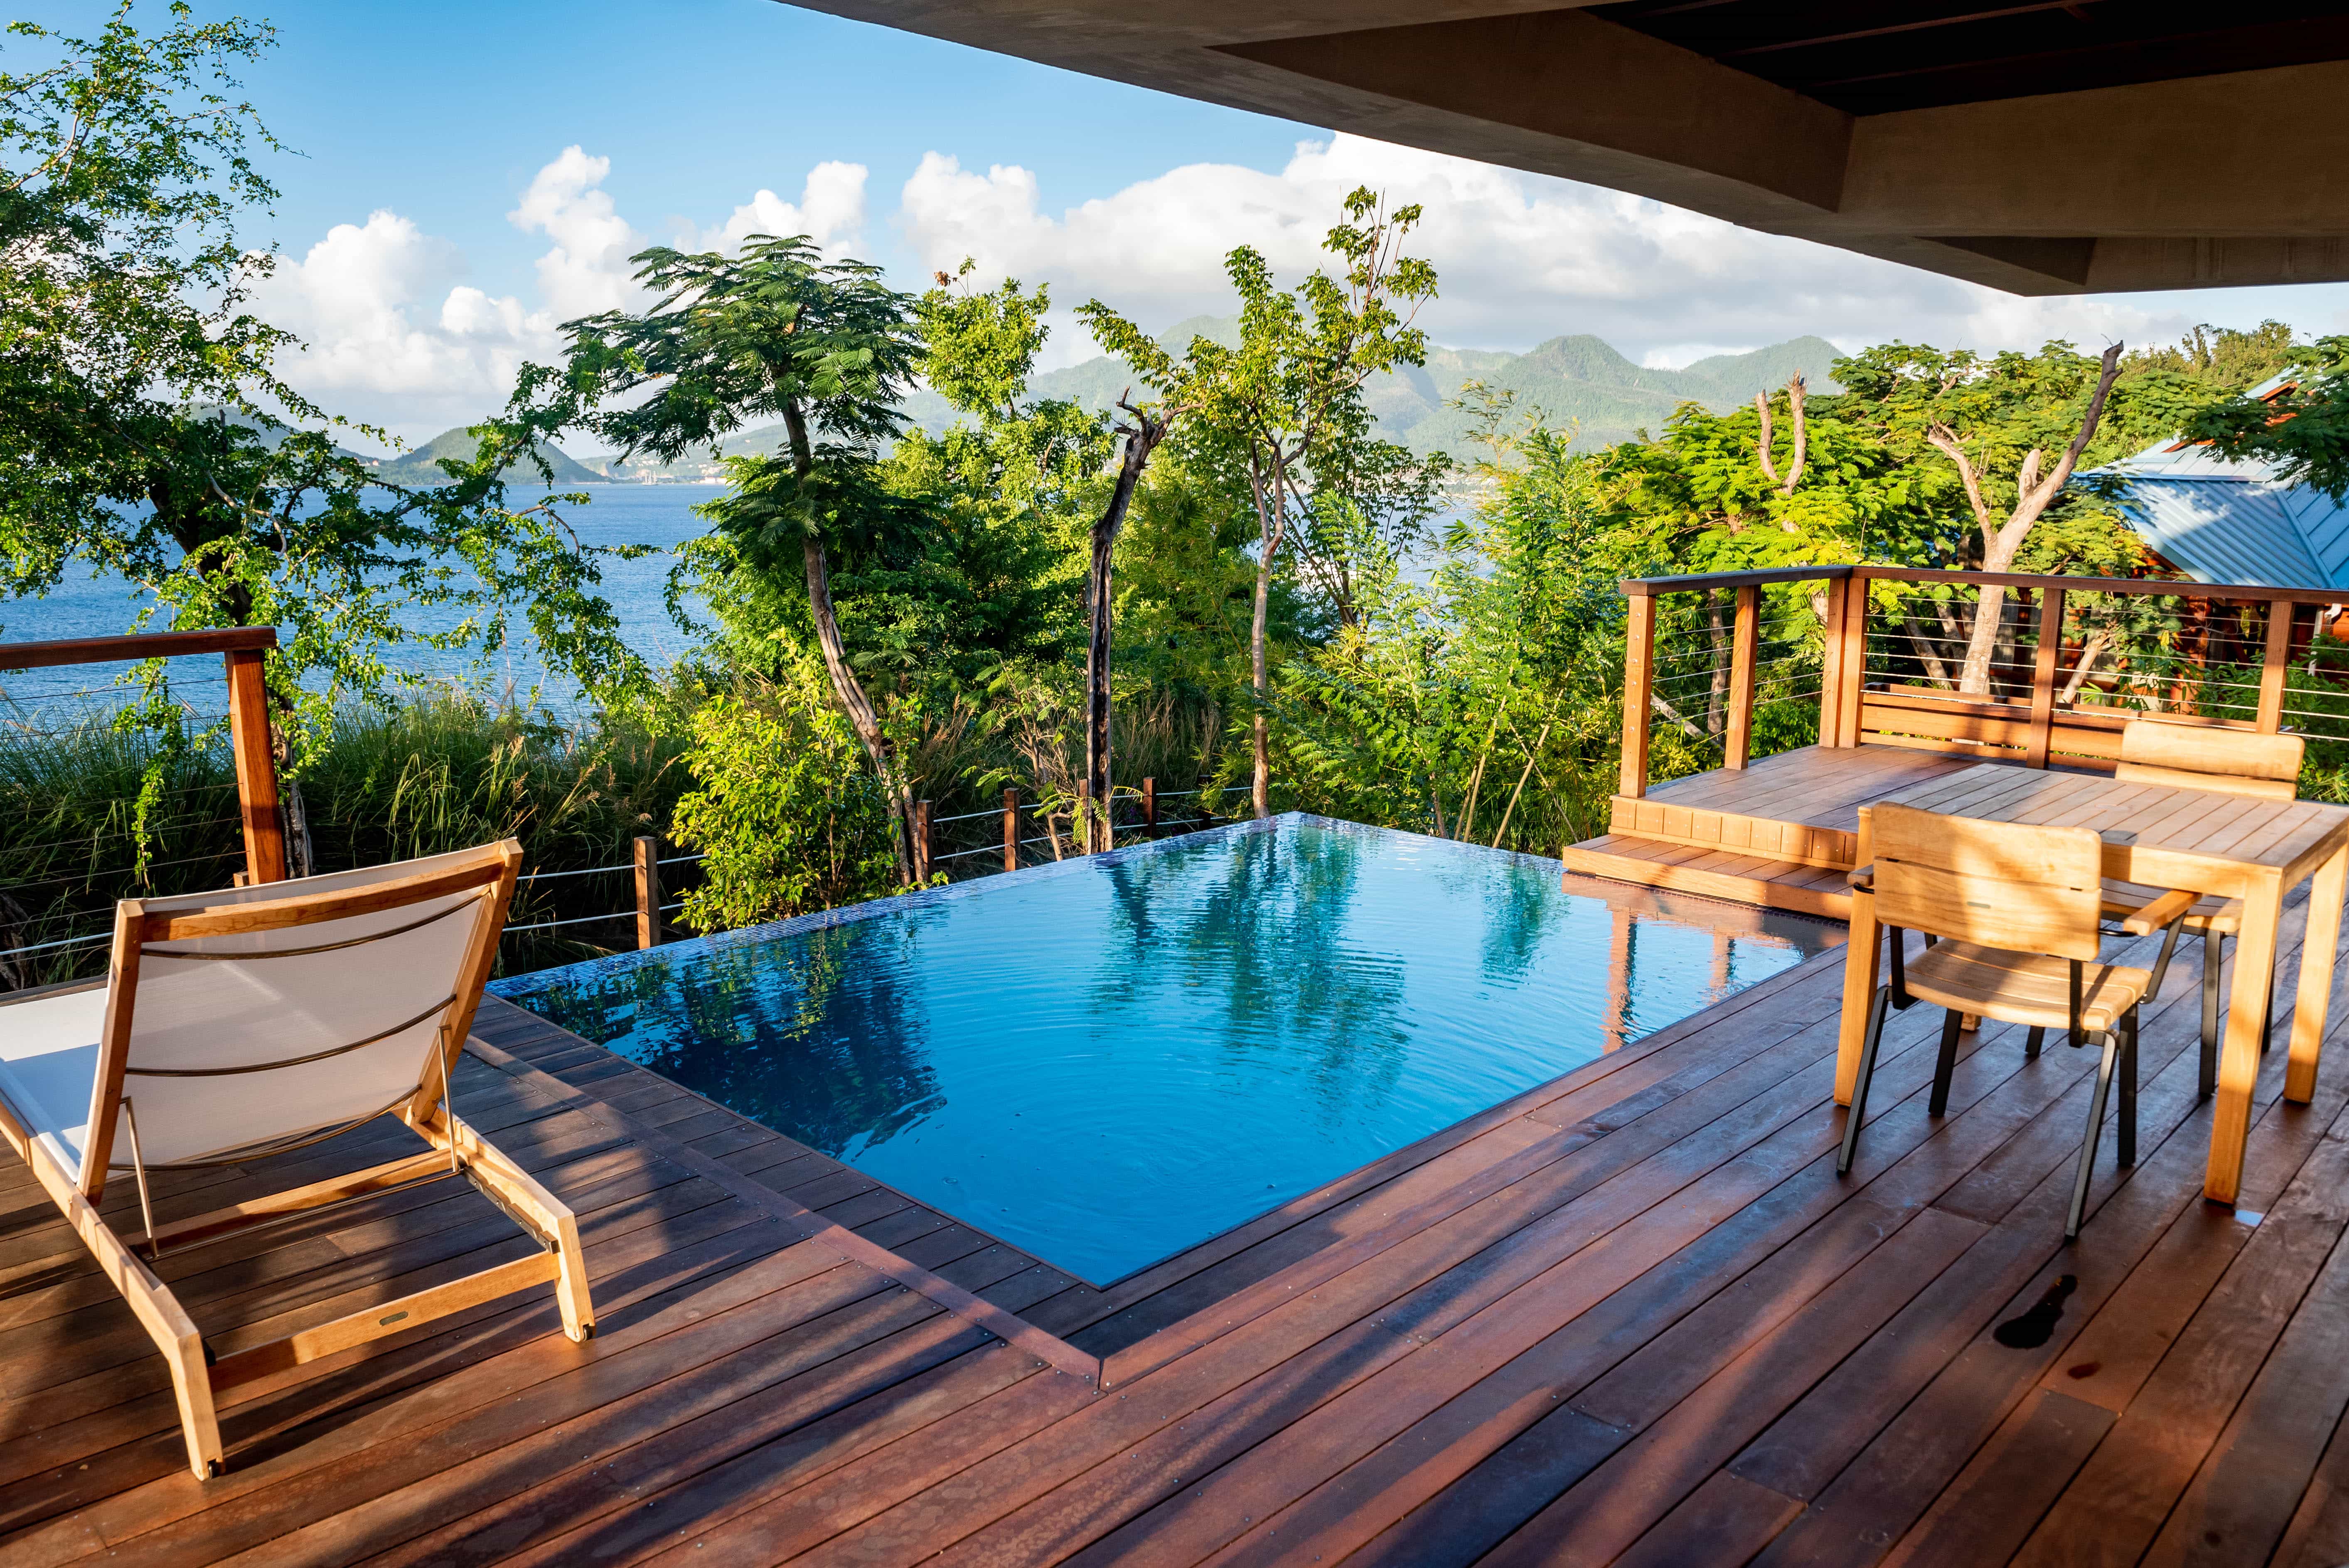 Each villa comes equipped with a plunge pool discreetly tucked behind foliage. What you do with it, is up to you!